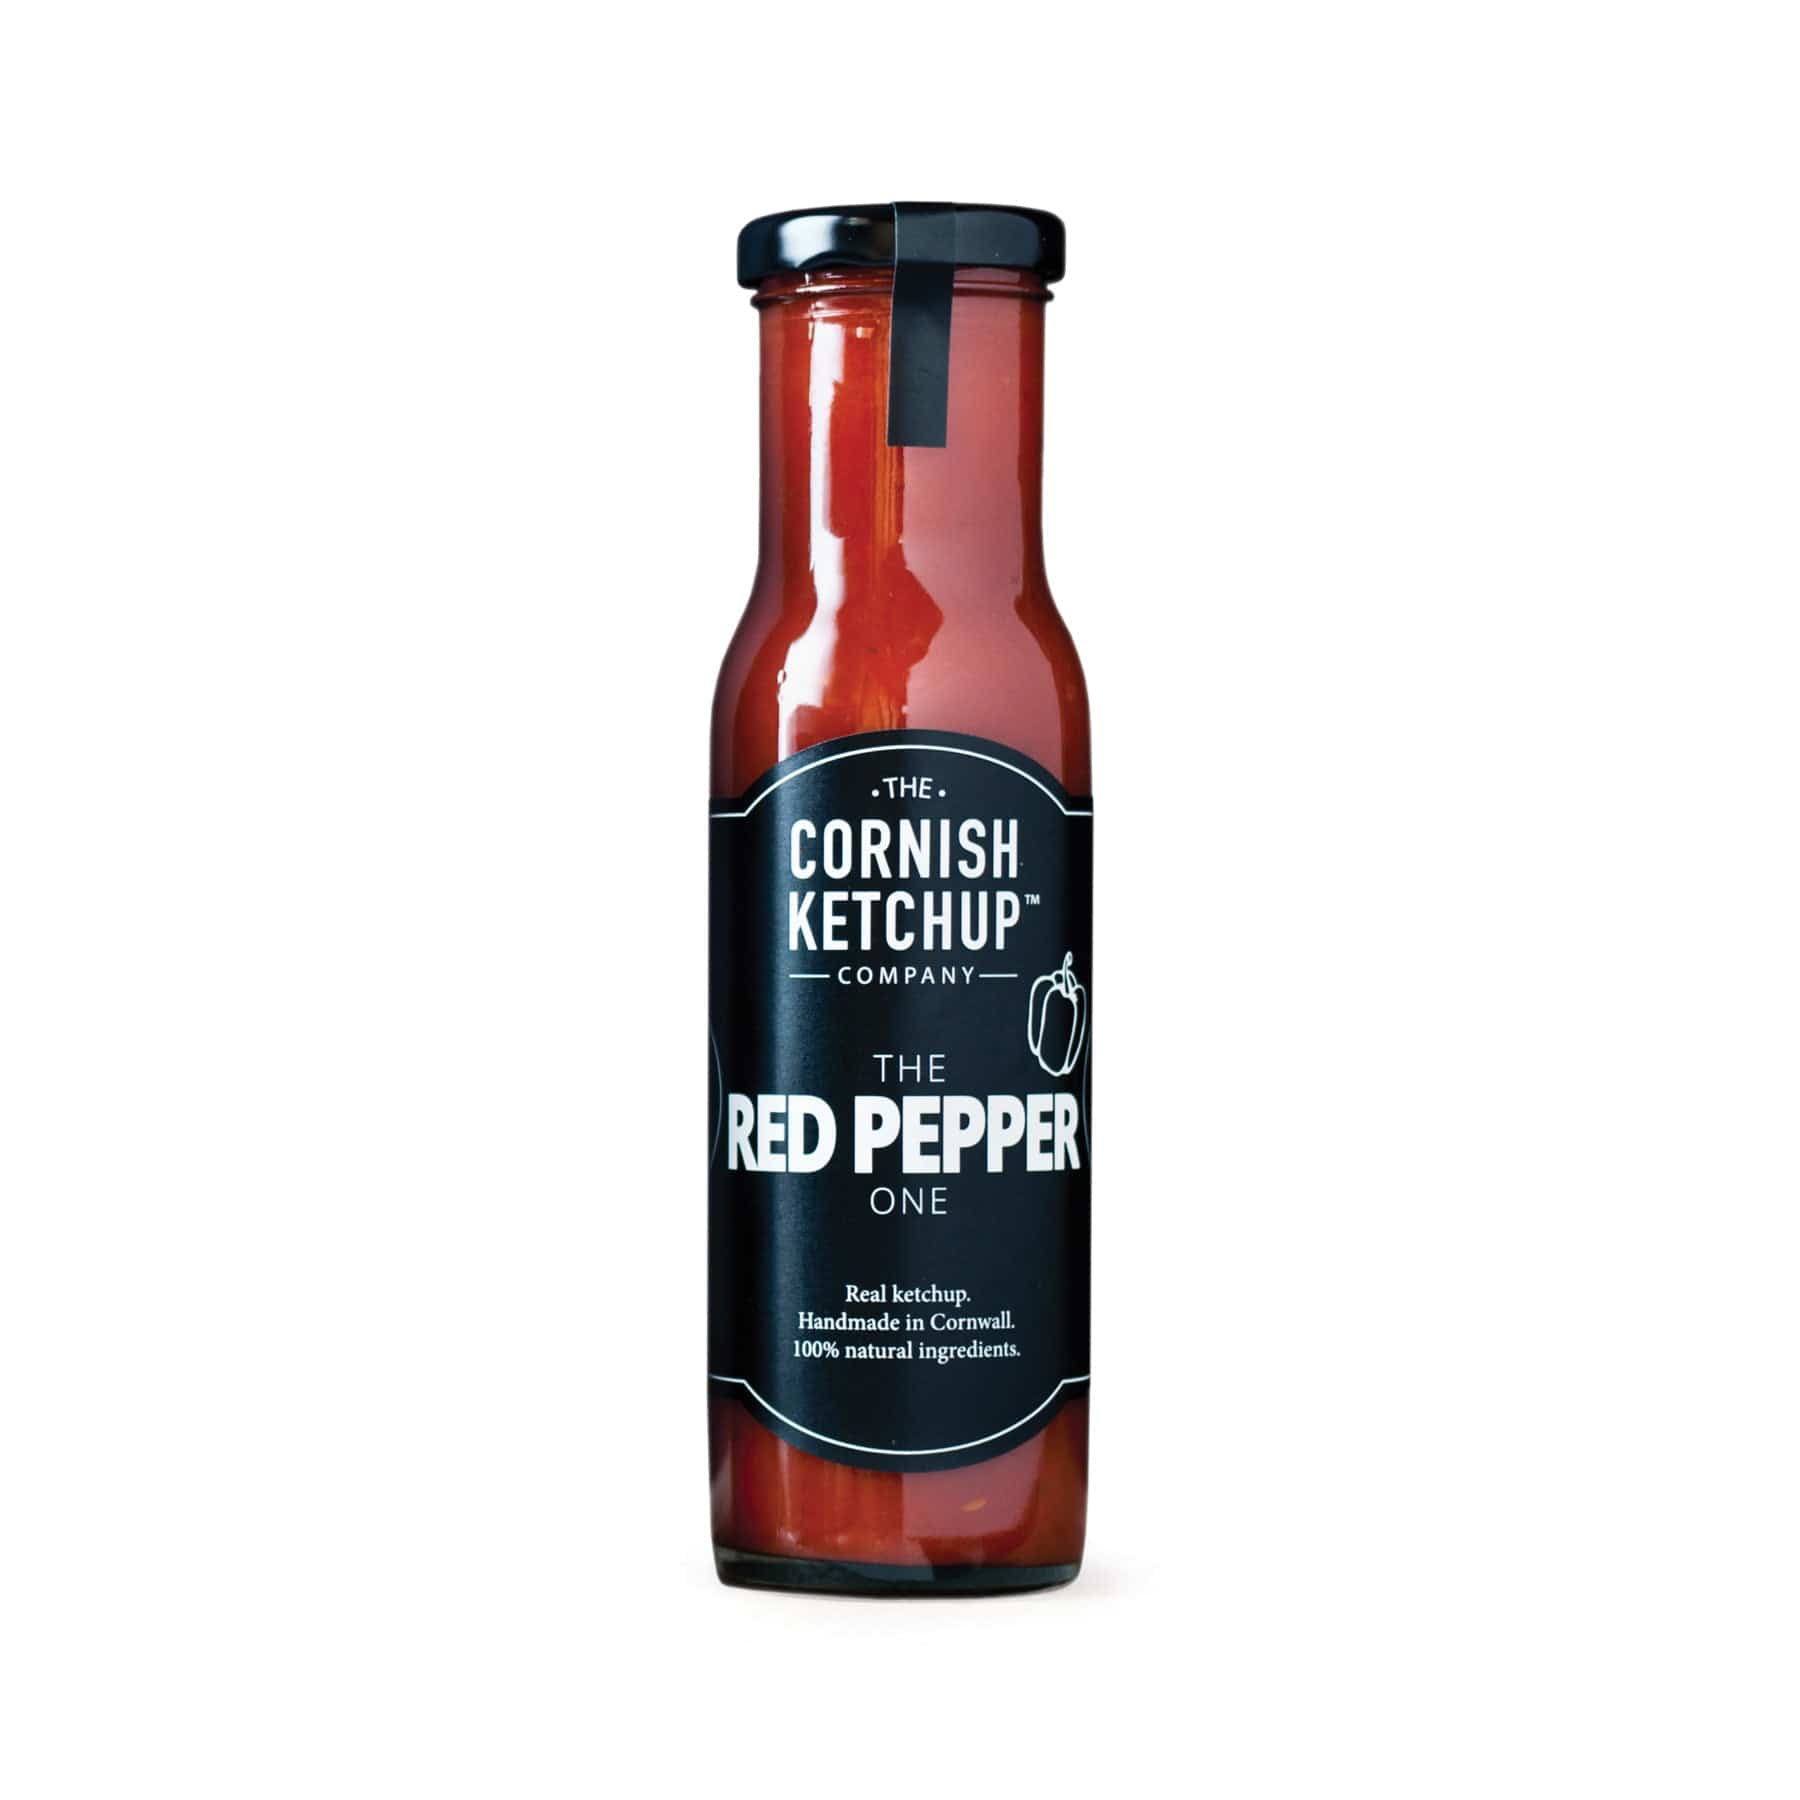 Cornish Ketchup Company Red Pepper Ketchup Bottle, Handmade in Cornwall with 100% Natural Ingredients